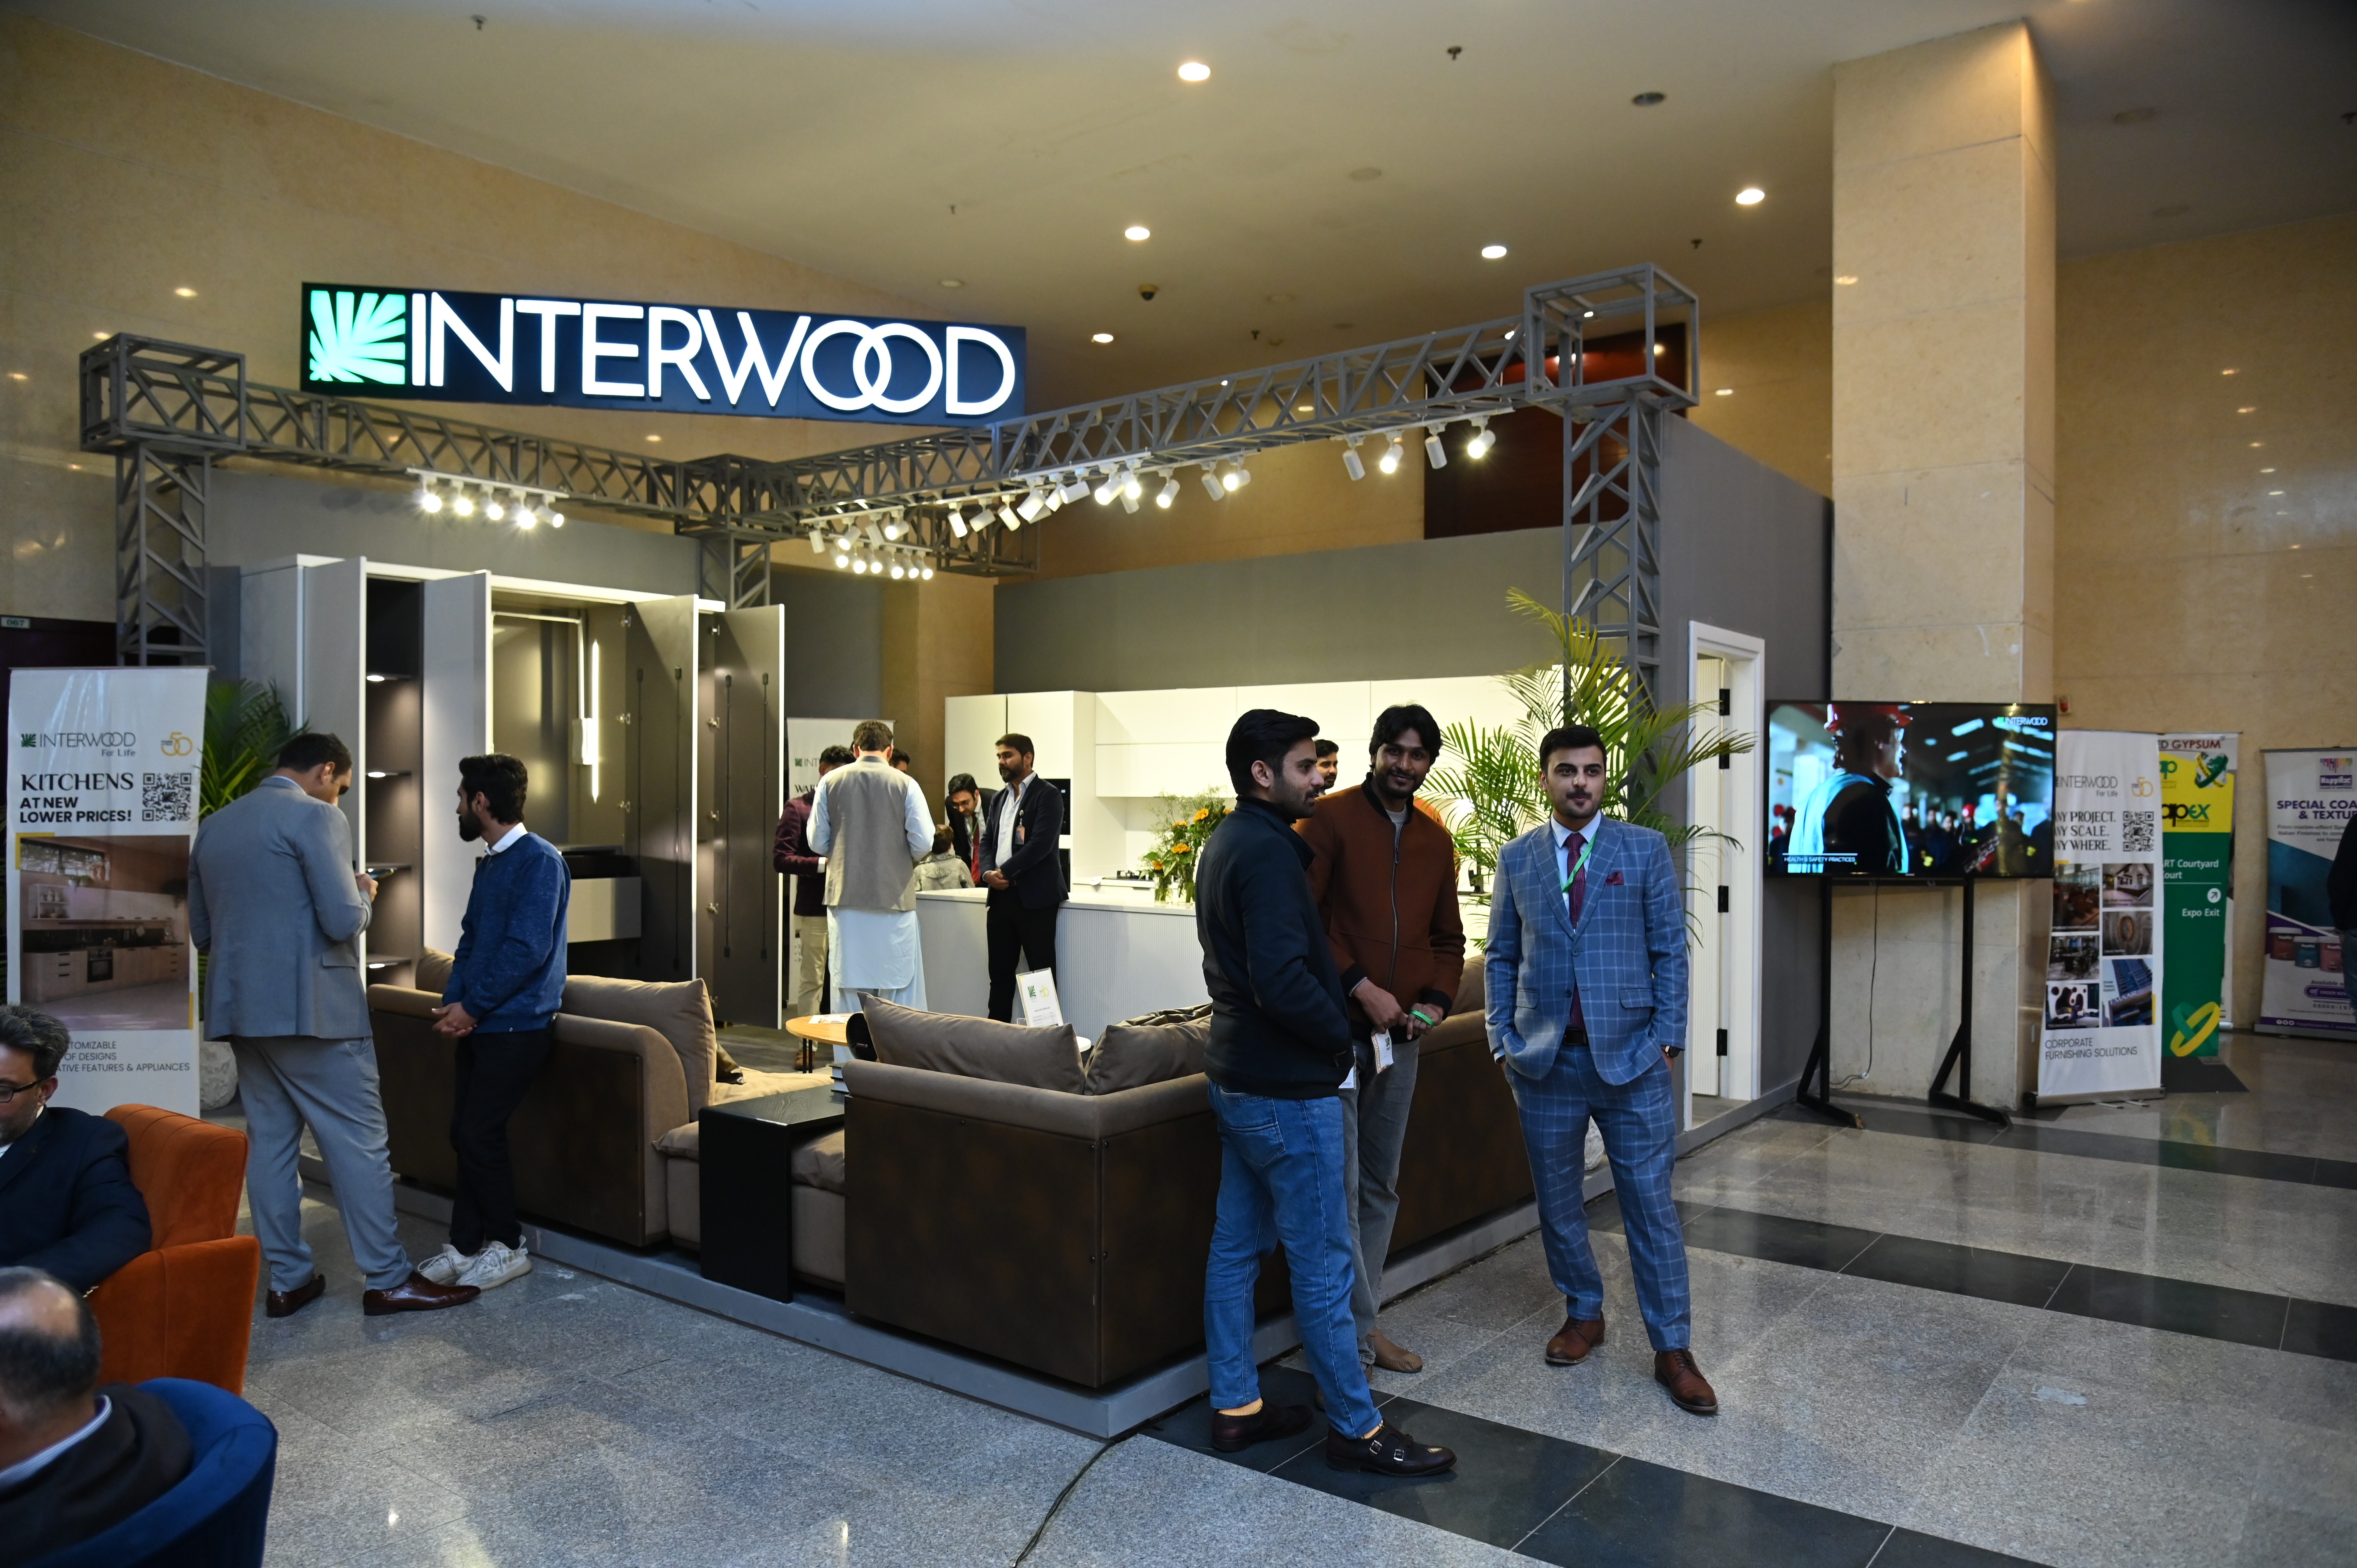 The InterWood section busy during the exhibition